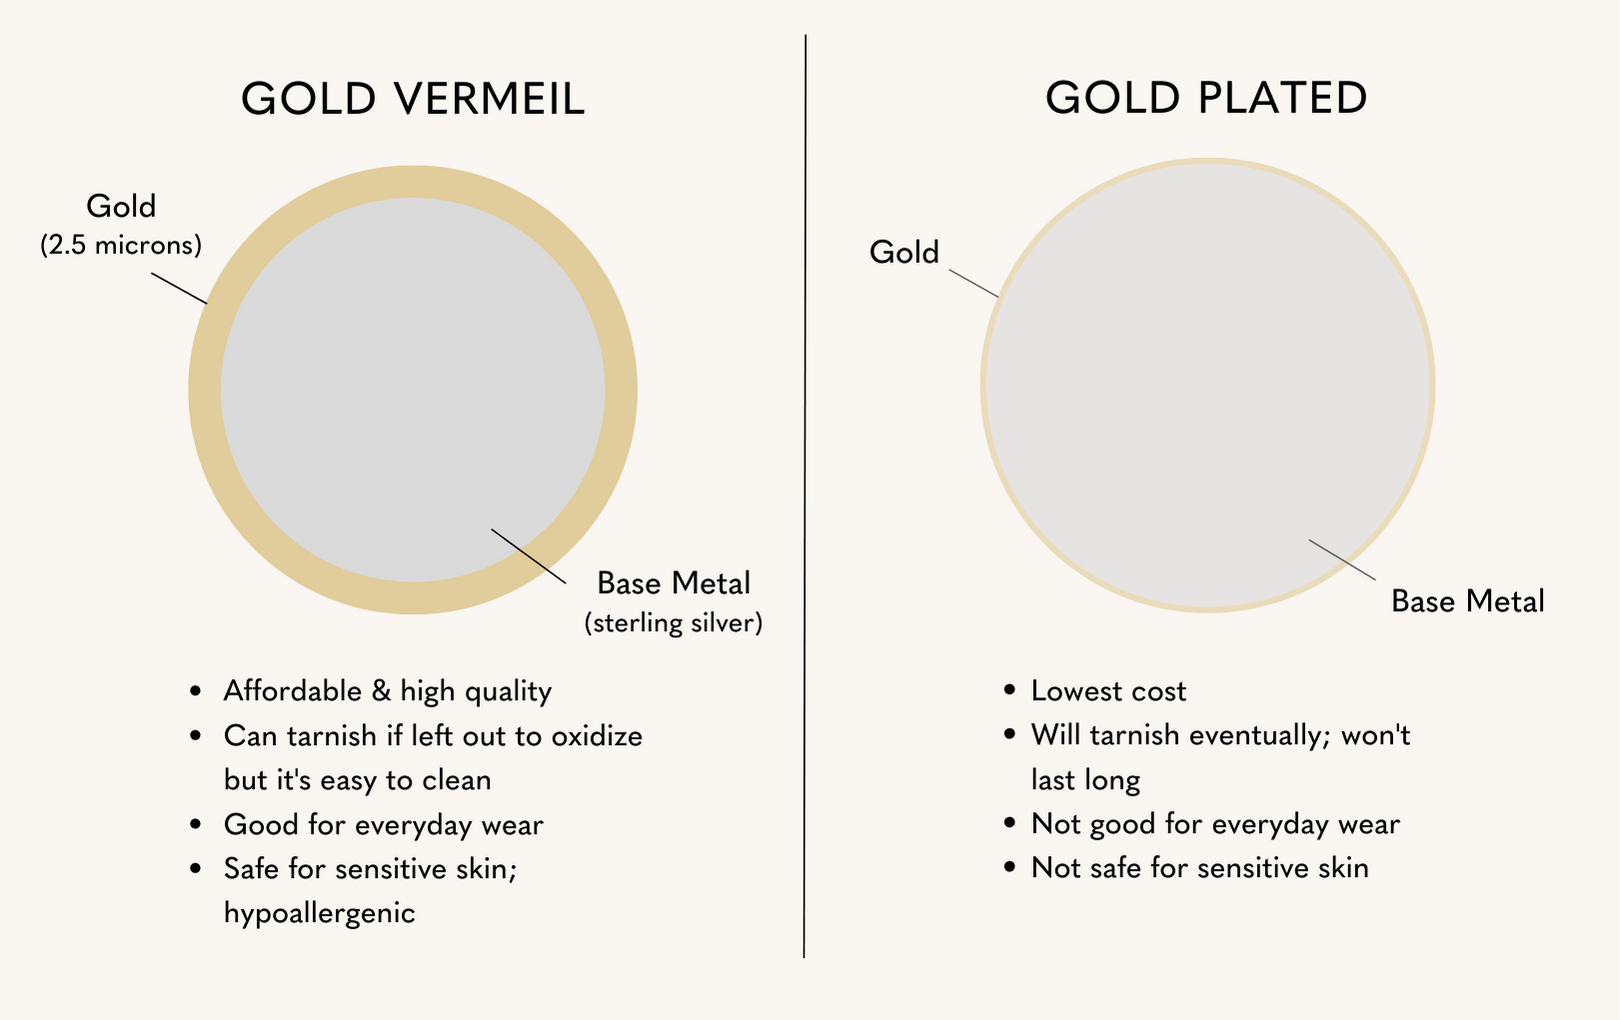 Gold Vermeil vs Gold Plated